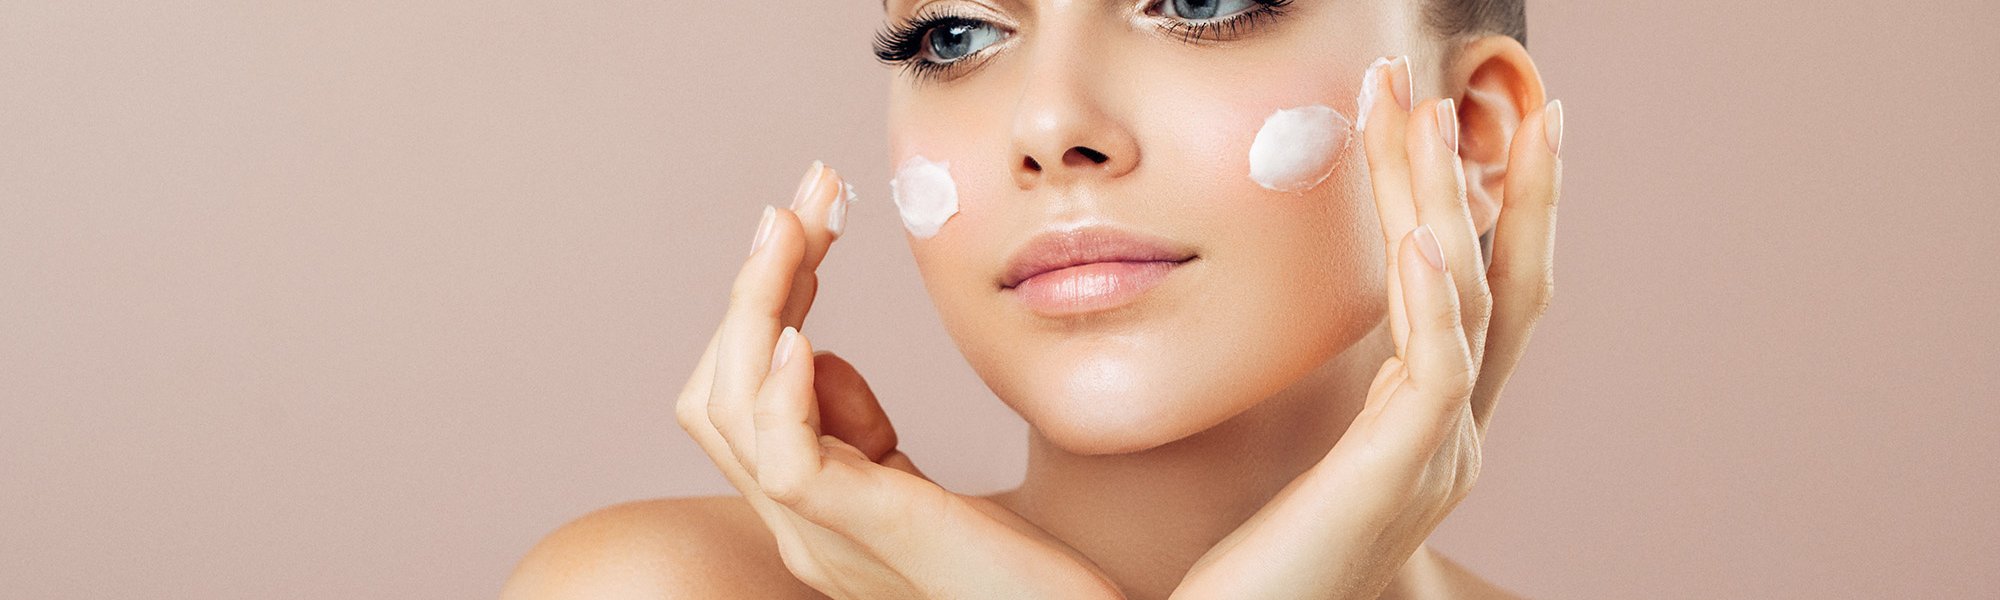 Skincare 101how To Repair Your Skin After A Hot Summer